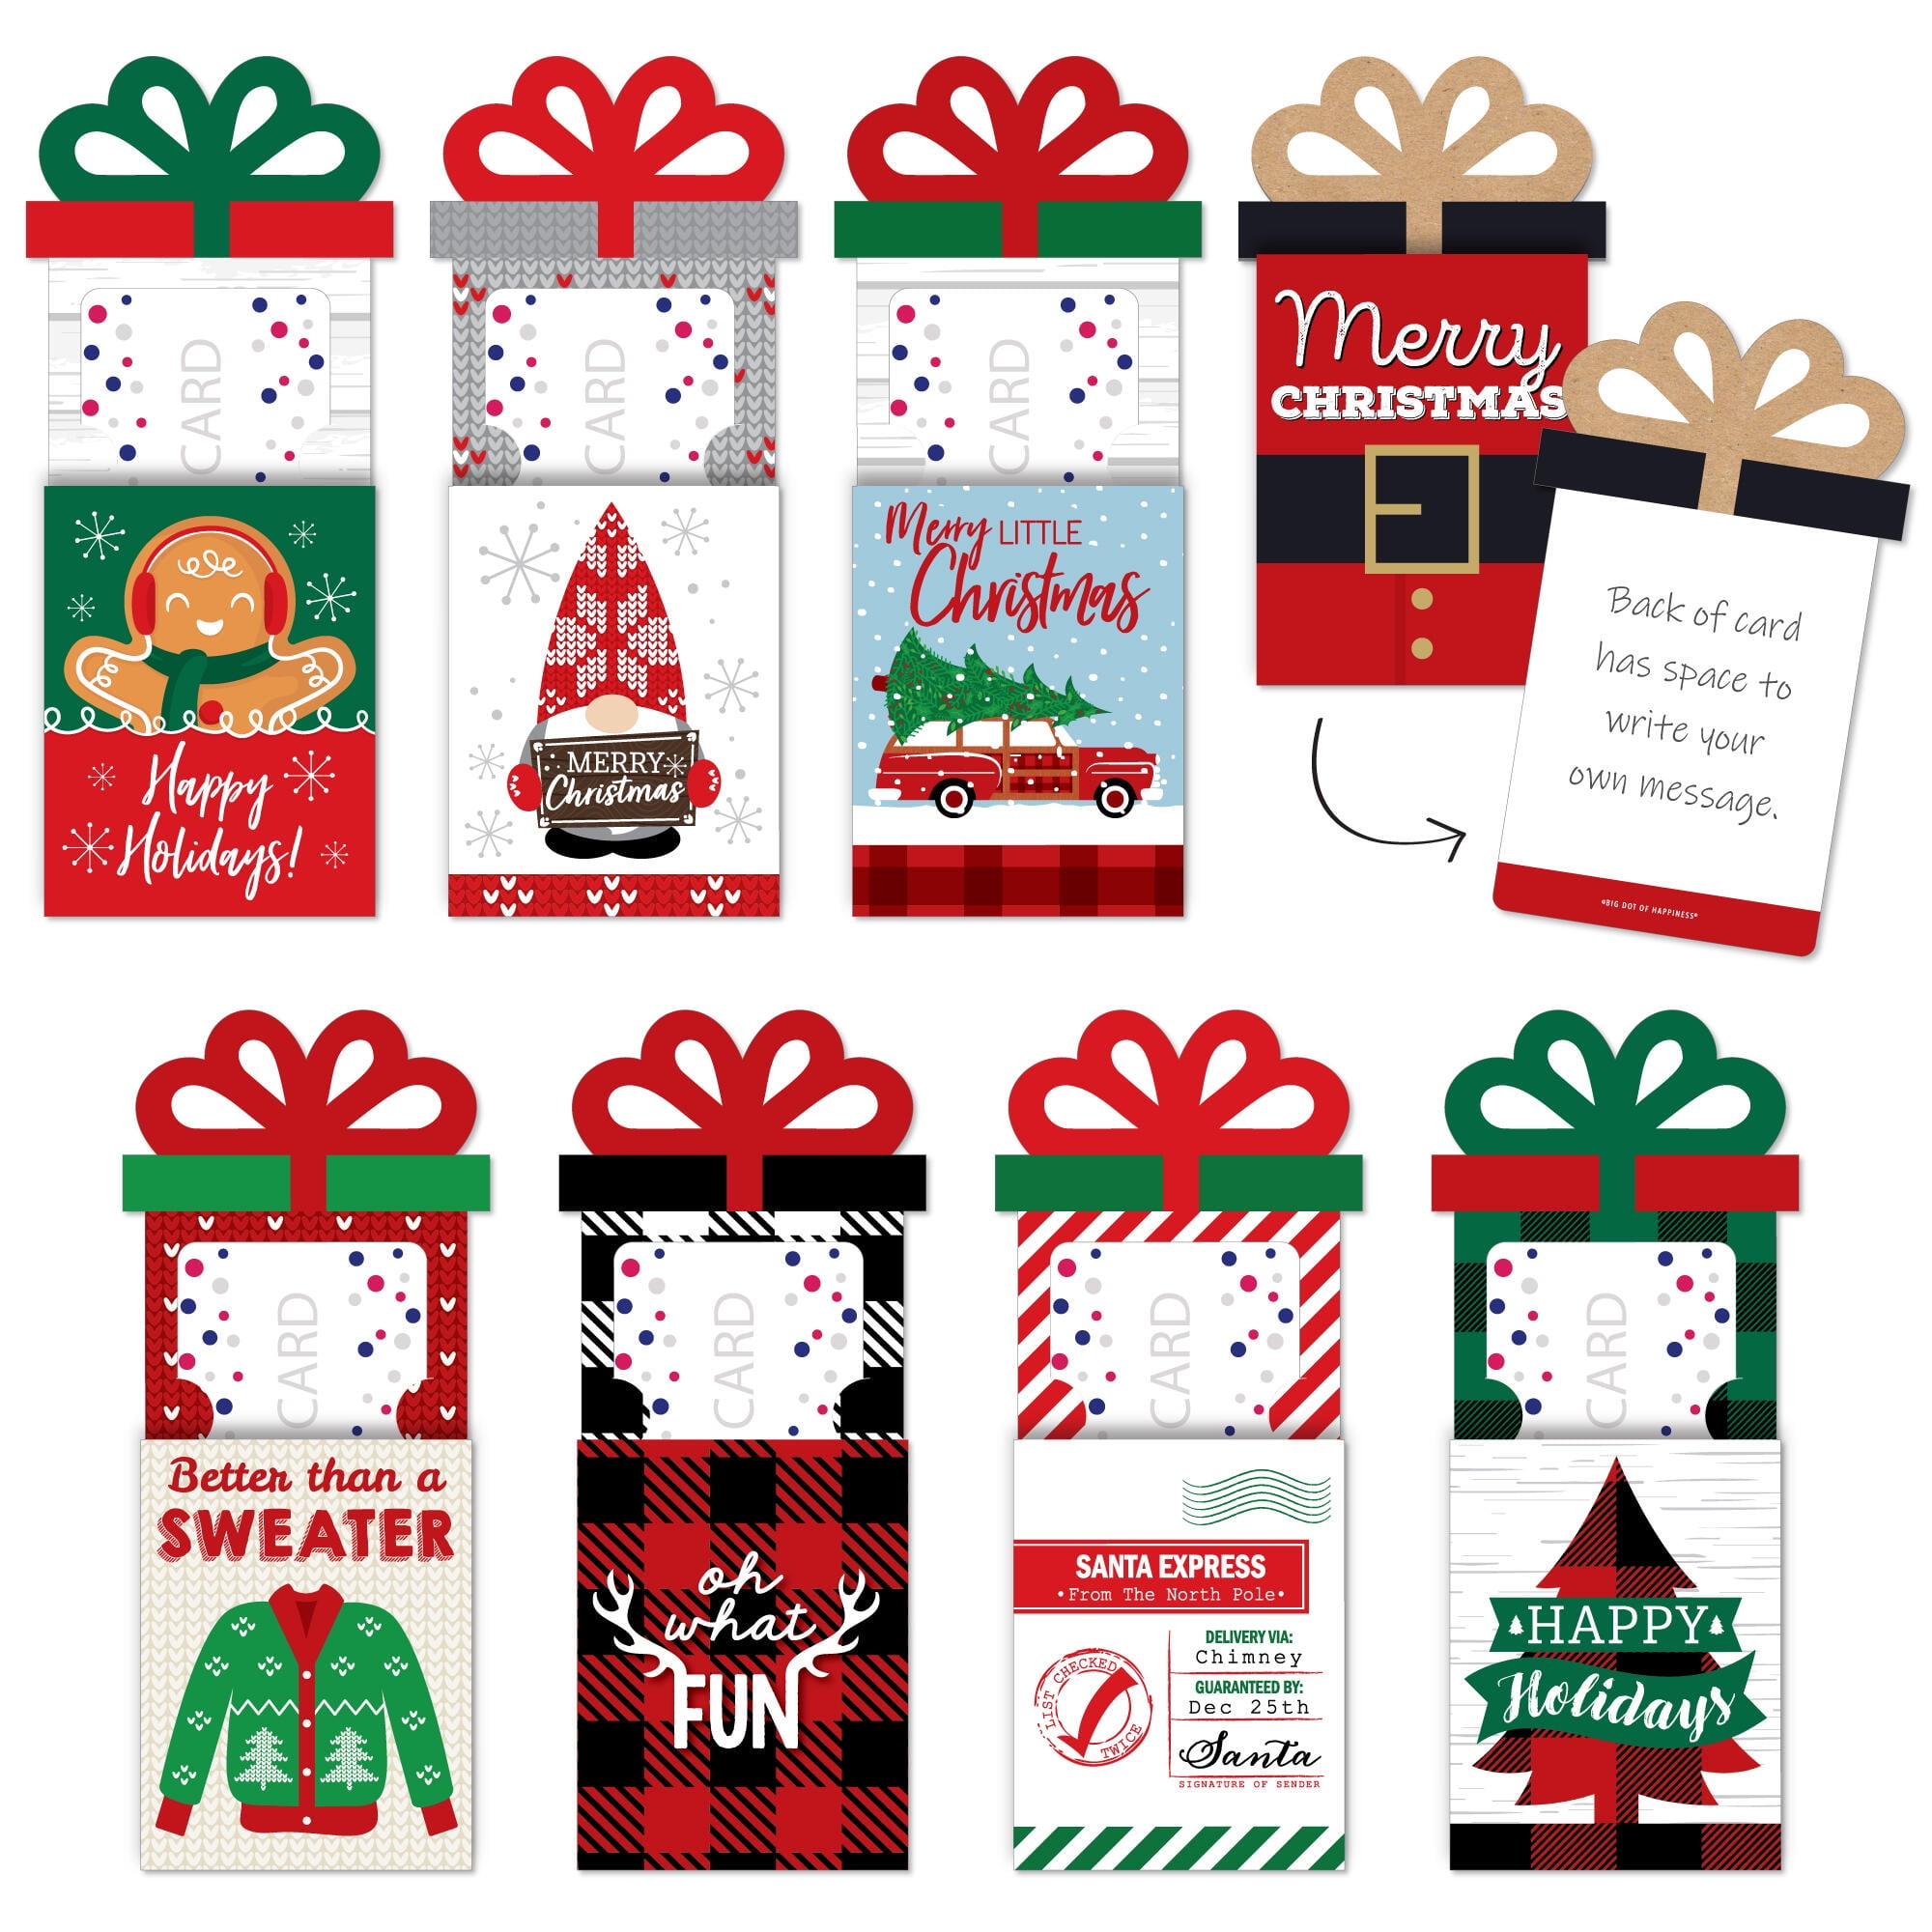 24 Christmas Gift Card Money Holder with Envelopes 3 Festive Holiday Designs 